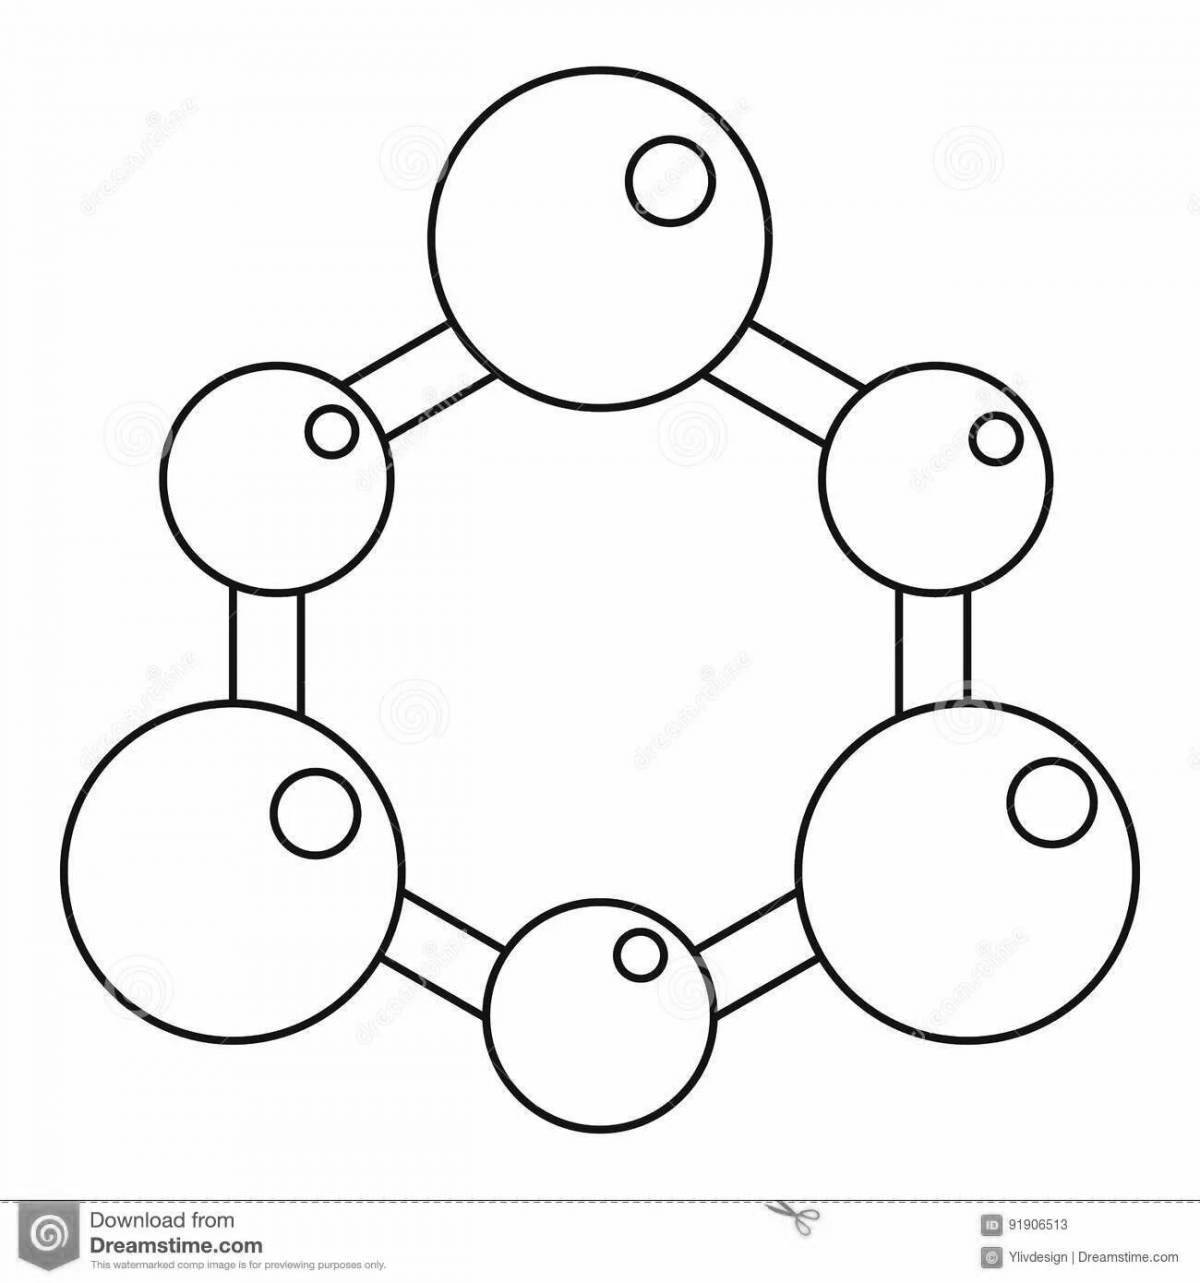 Coloring page stimulating water molecule